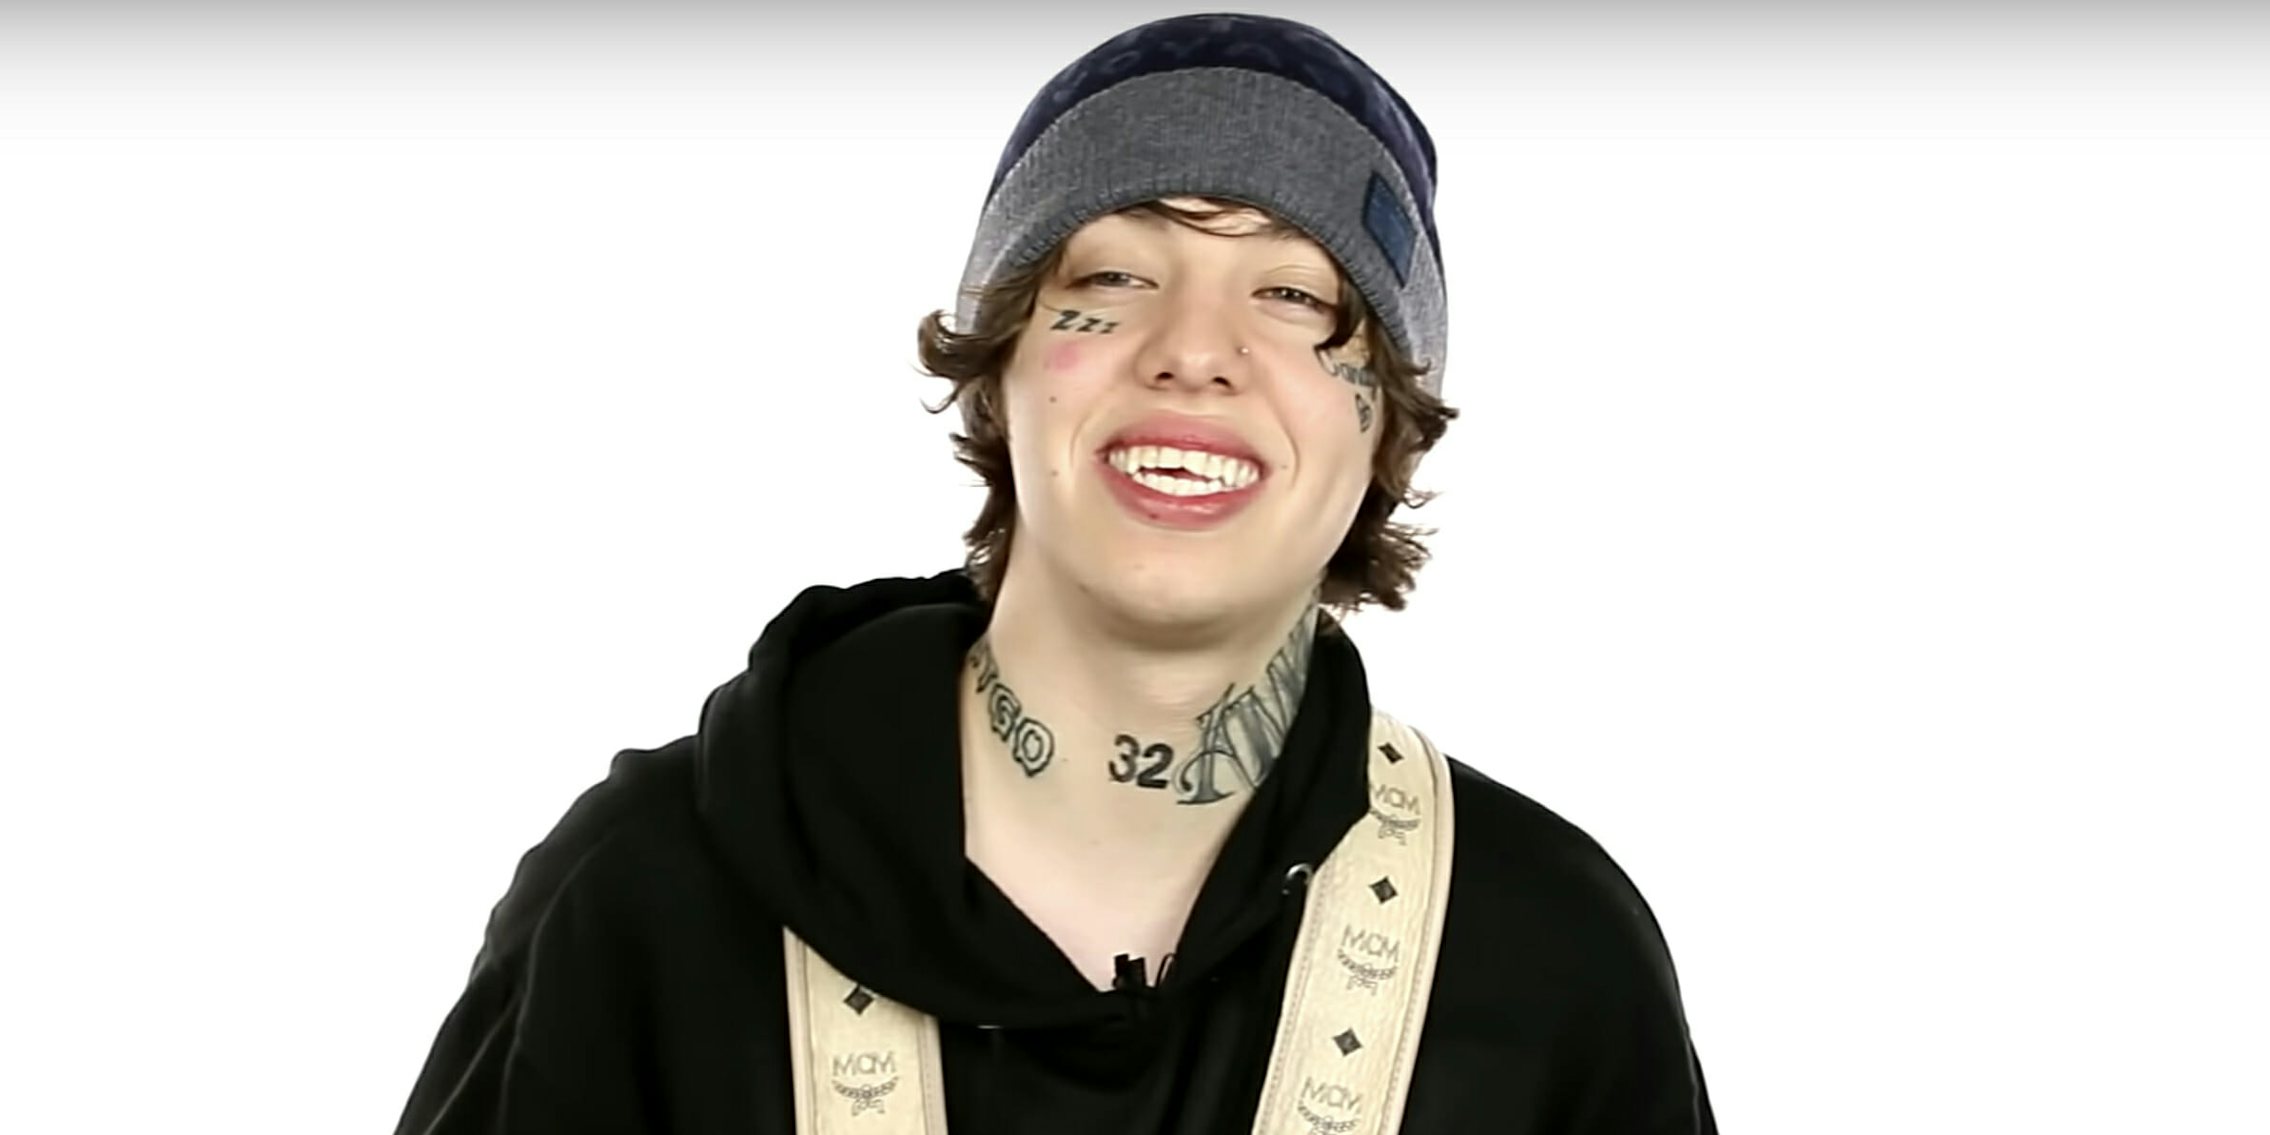 Lil Xan says he was hospitalized after eating too many Flamin' Hot Cheetos.